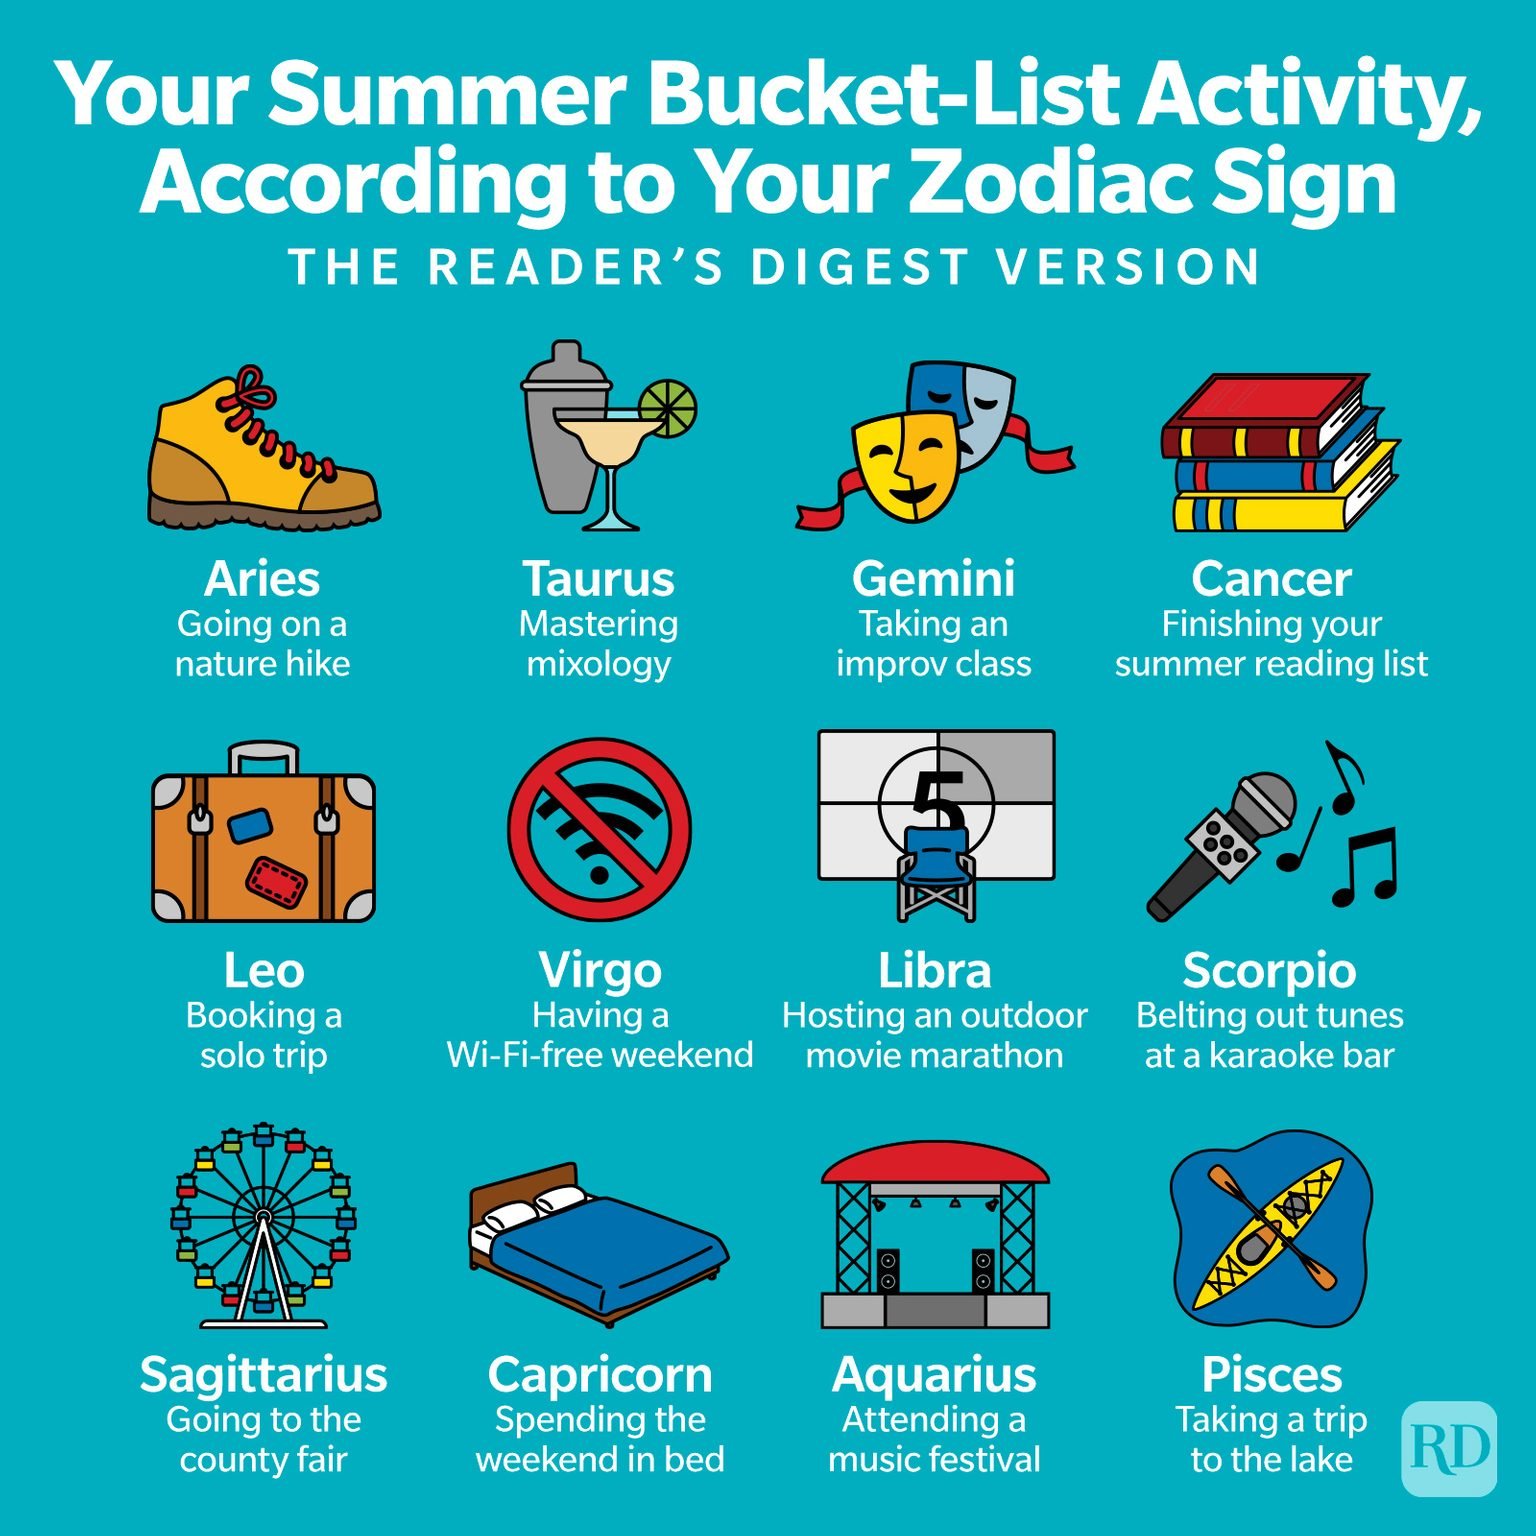 Your-Summer-Bucket-List-Activity-According-to-Your-Zodiac-Sign-Infographic-GettyImages12.jpg